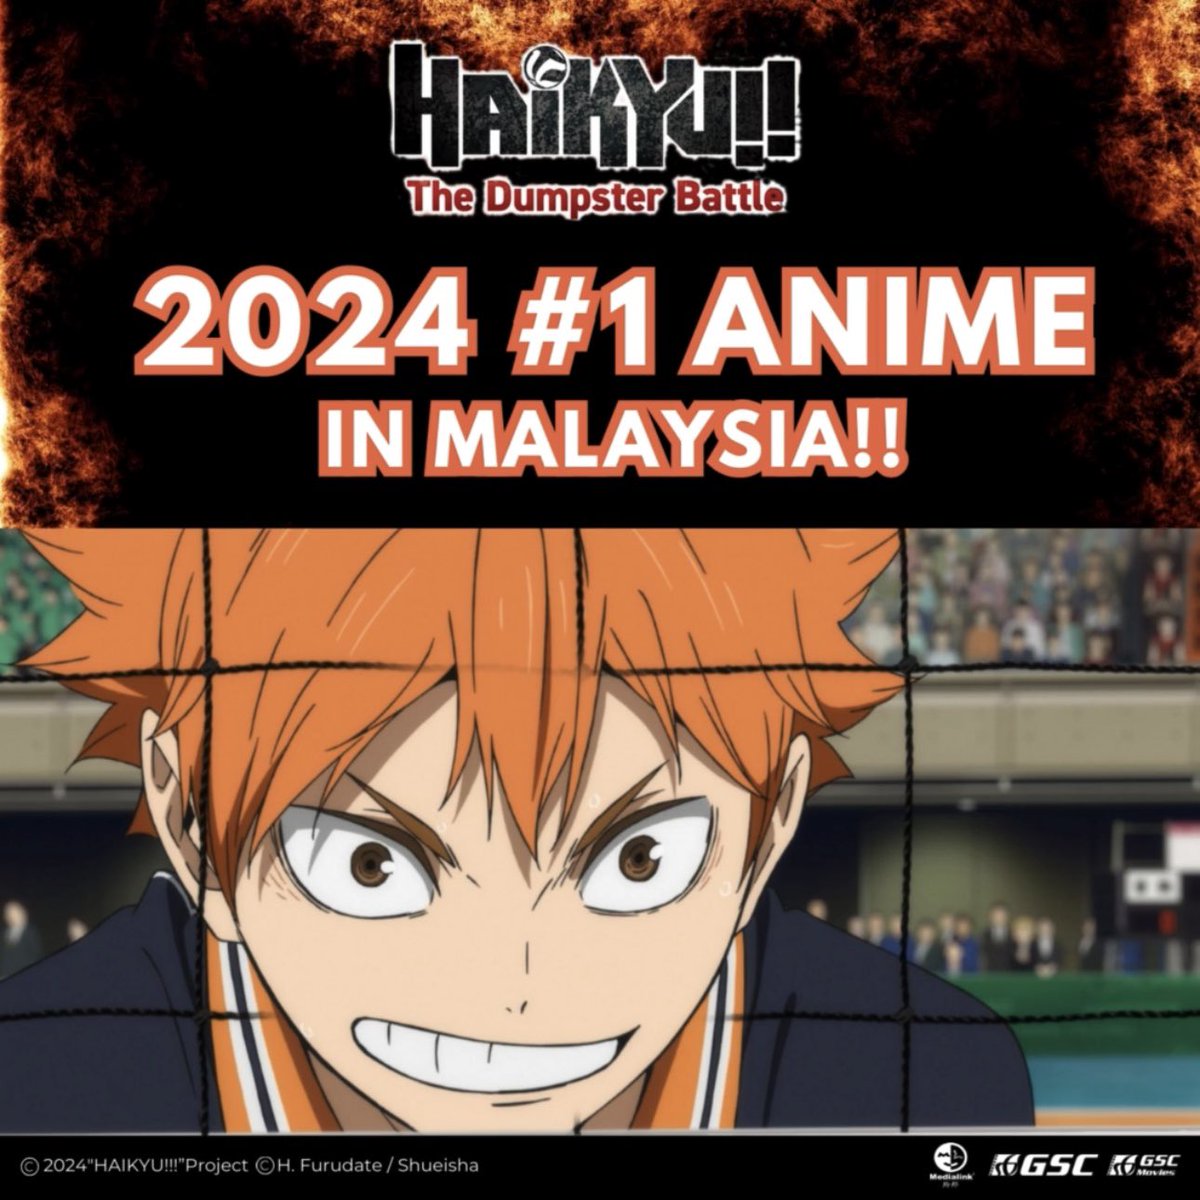 🏐🫶🏻WE DID IT! THANKS FOR MAKING US THE #1 Anime in Malaysia! 🔥👏

Haikyu!!: The Dumpster Battle is still showing in GSC! 
Secure your best seats now! 😍

#MedialinkFilmsMY #GSCMovies #GSC #ハイキュー  #ゴミ捨て場の決戦 #Haikyu #HaikyuTheDumpsterBattle #排球少年 #剧场版排球少年